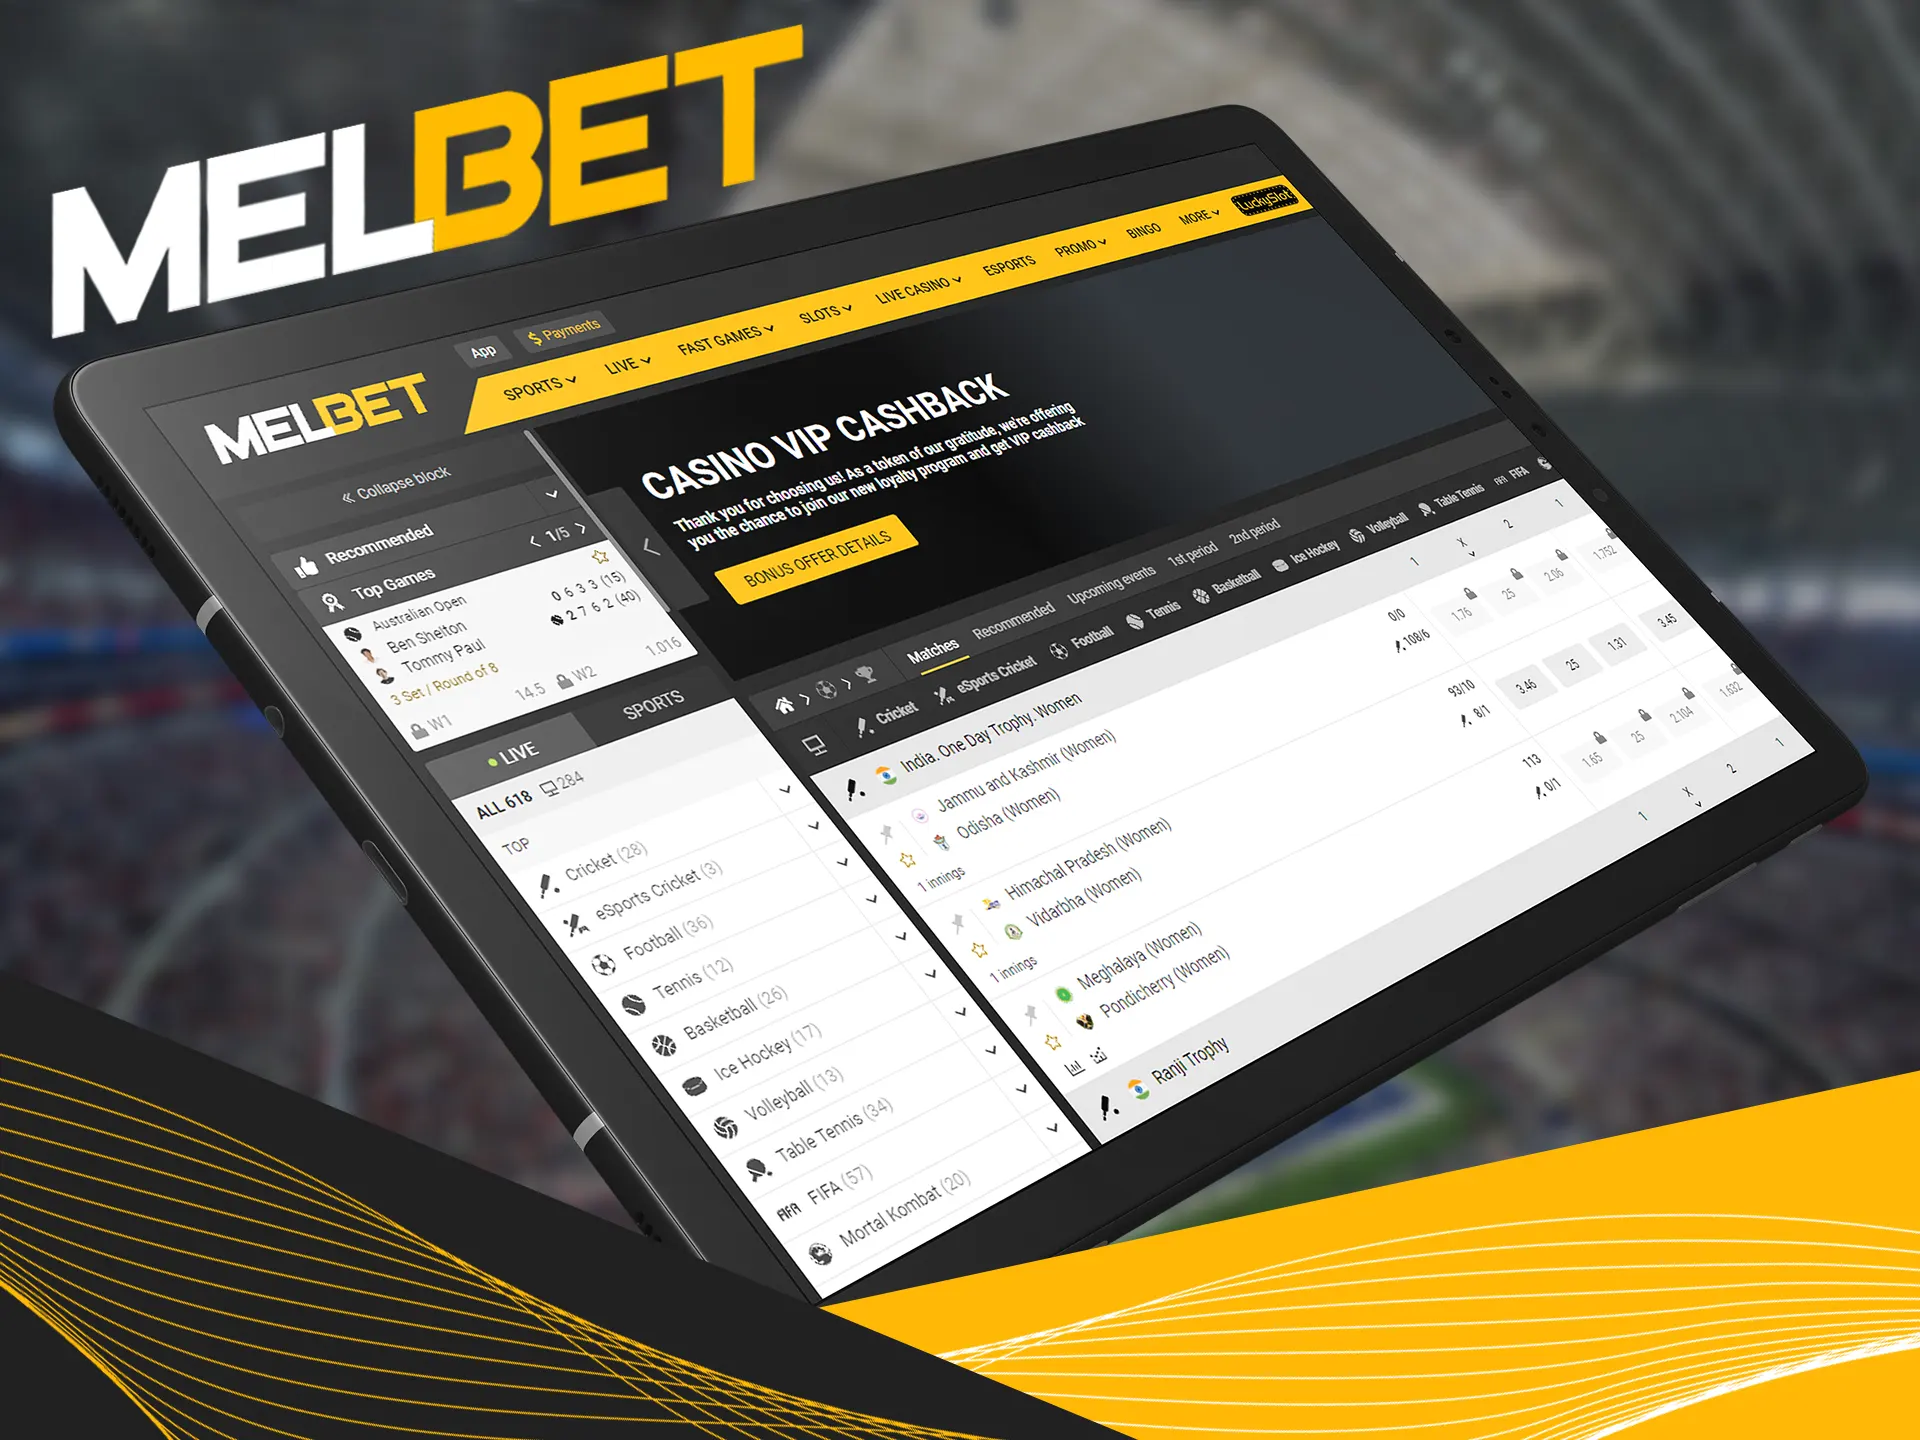 Use website version of Melbet on any device.